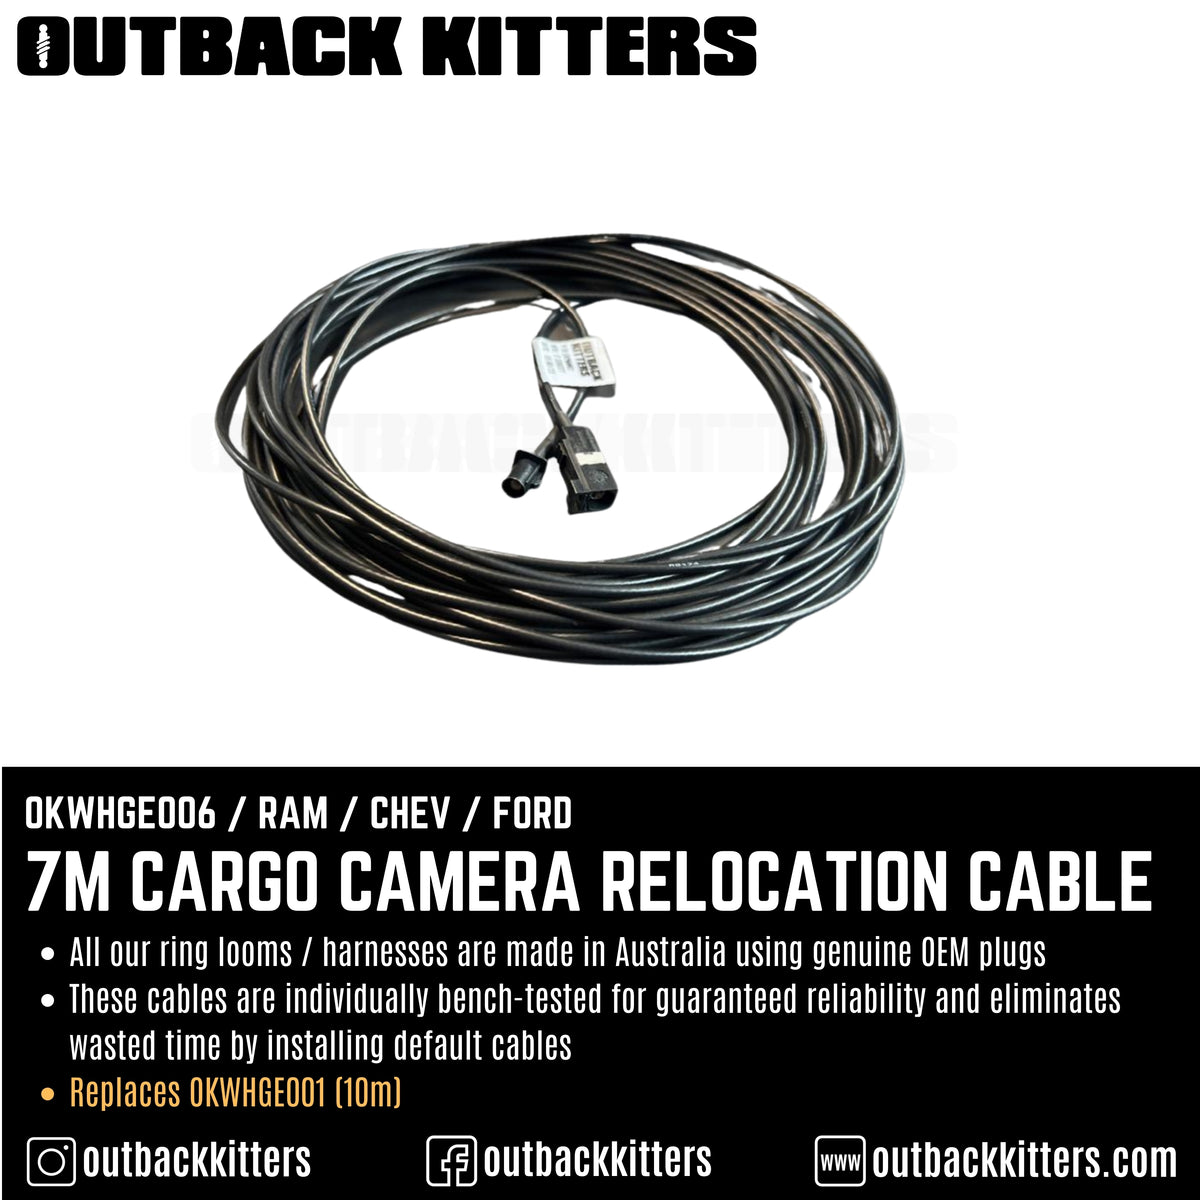 Outback Kitters 7m Cargo Camera Relocation Cable - Outback Kitters